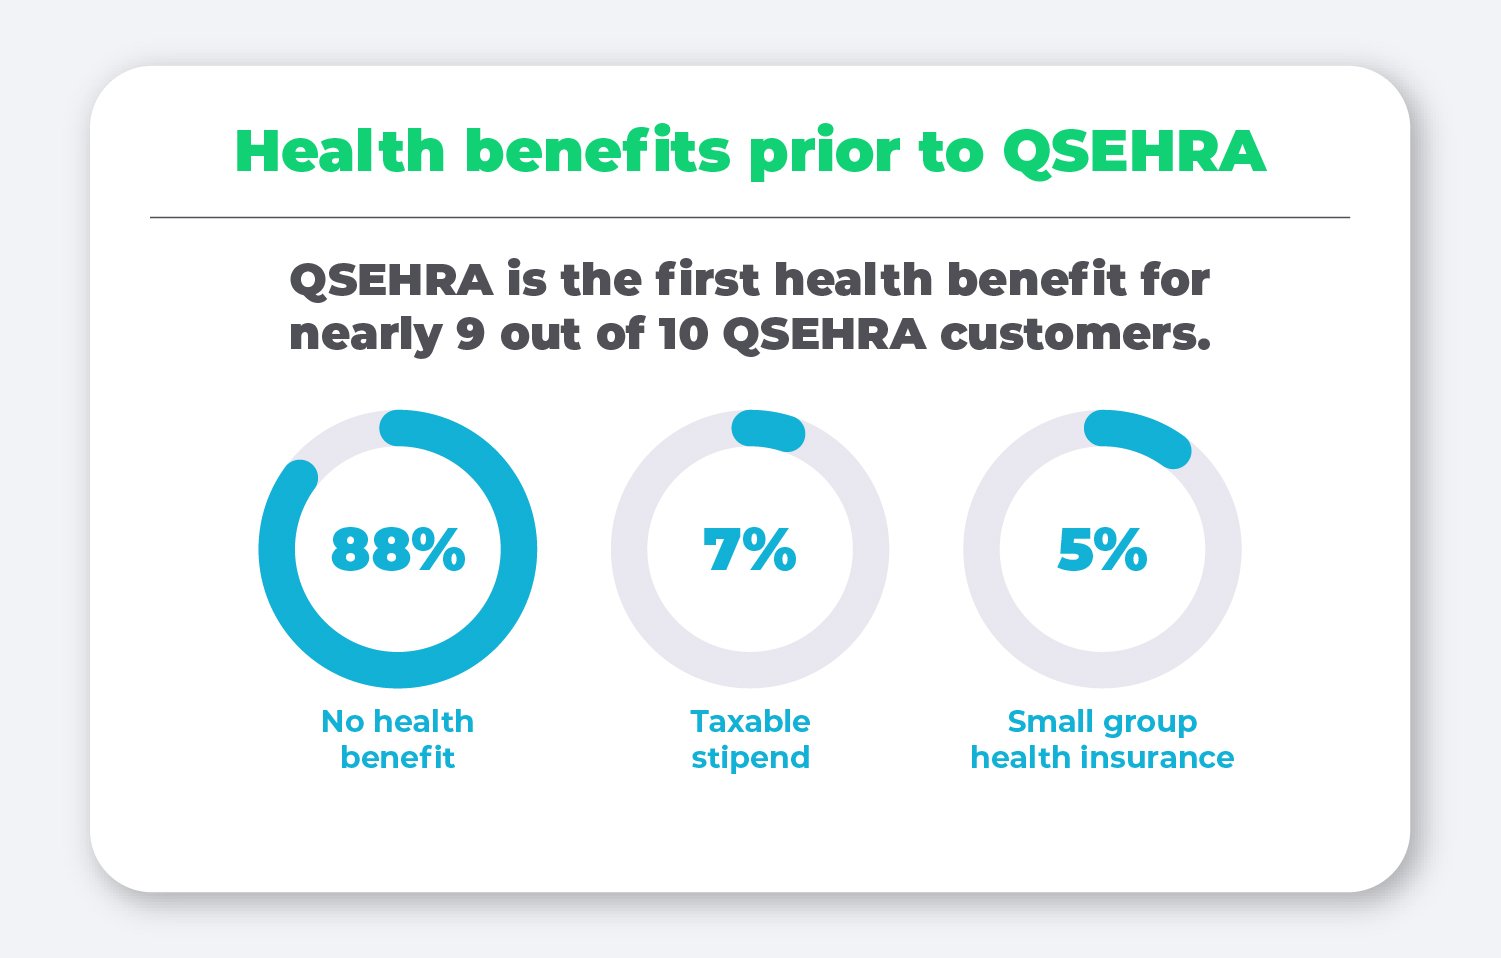 Health benefits prior to QSEHRA. QSEHRA is the first health benefit for nearly 9 out of 10 QSEHRA customers.